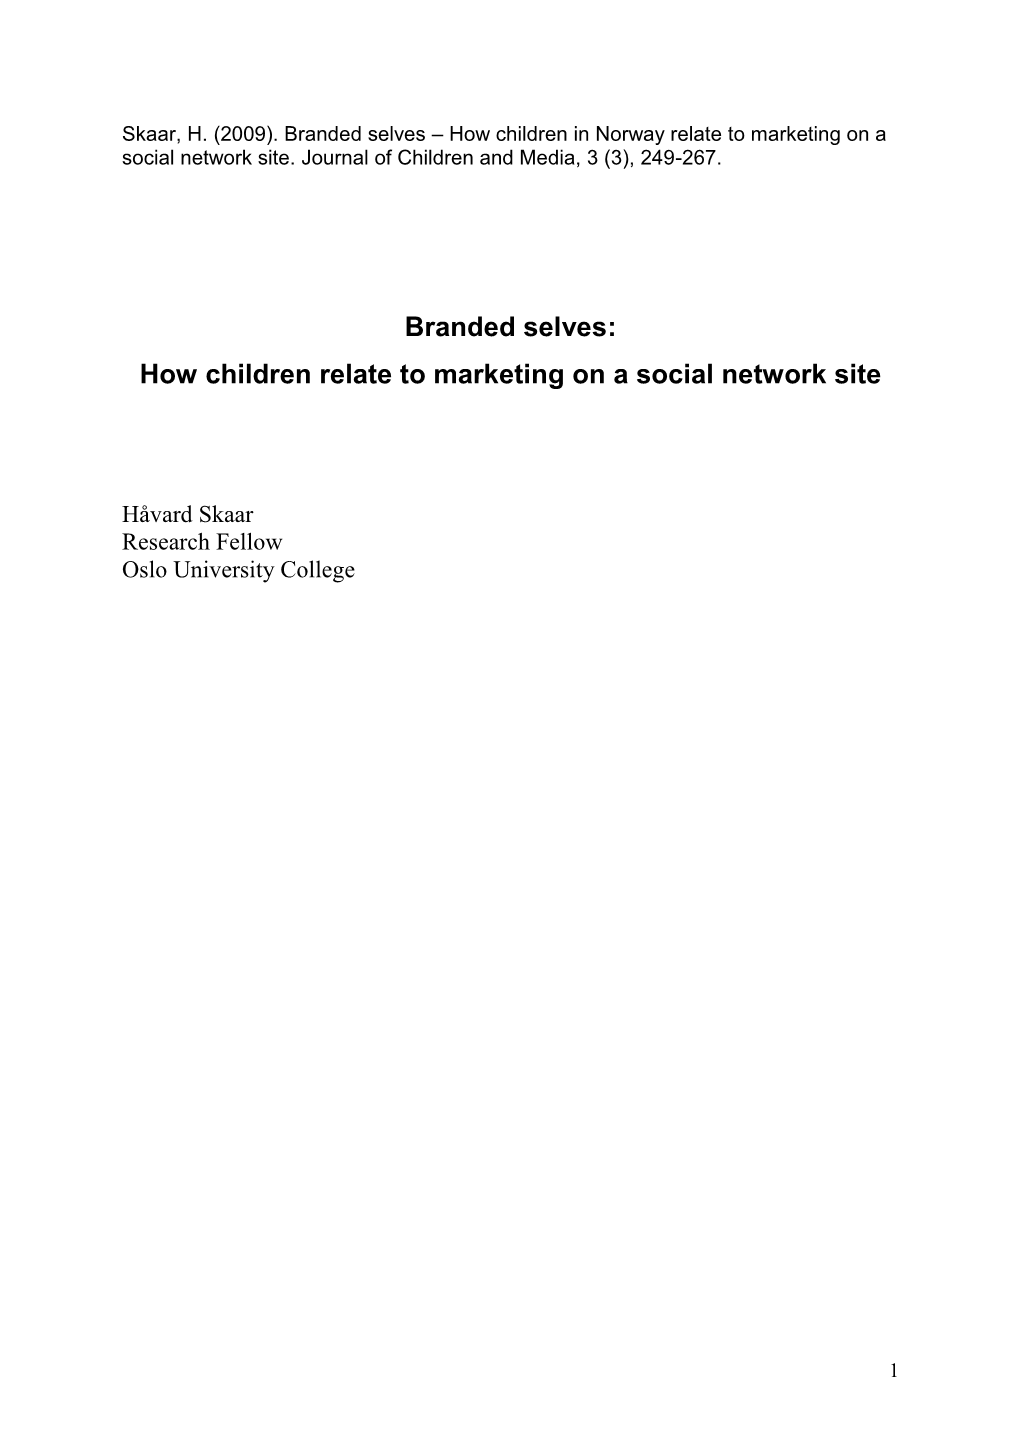 Branded Selves: How Children Relate to Marketing on a Social Network Site